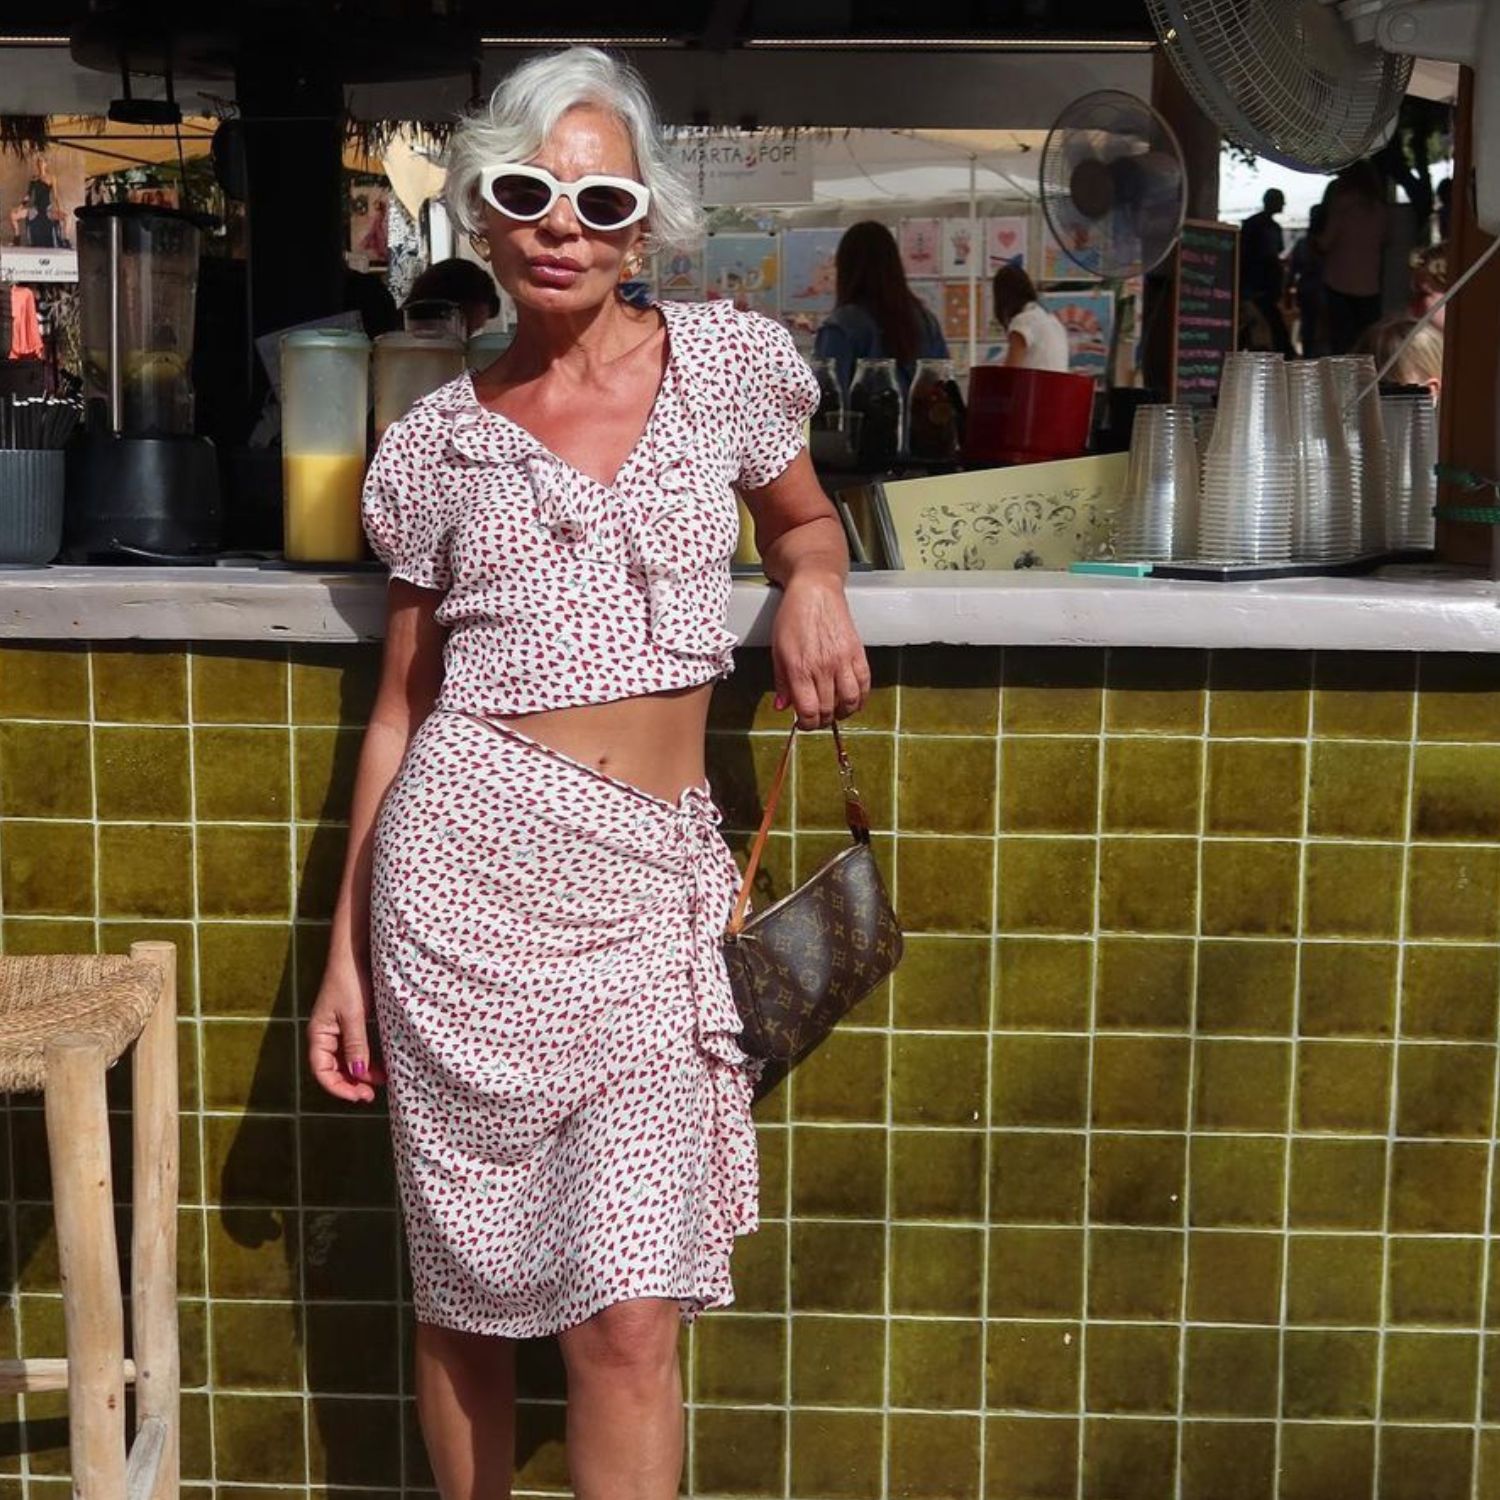  These stylish looks prove it, we’re in for a polka dot girl summer 